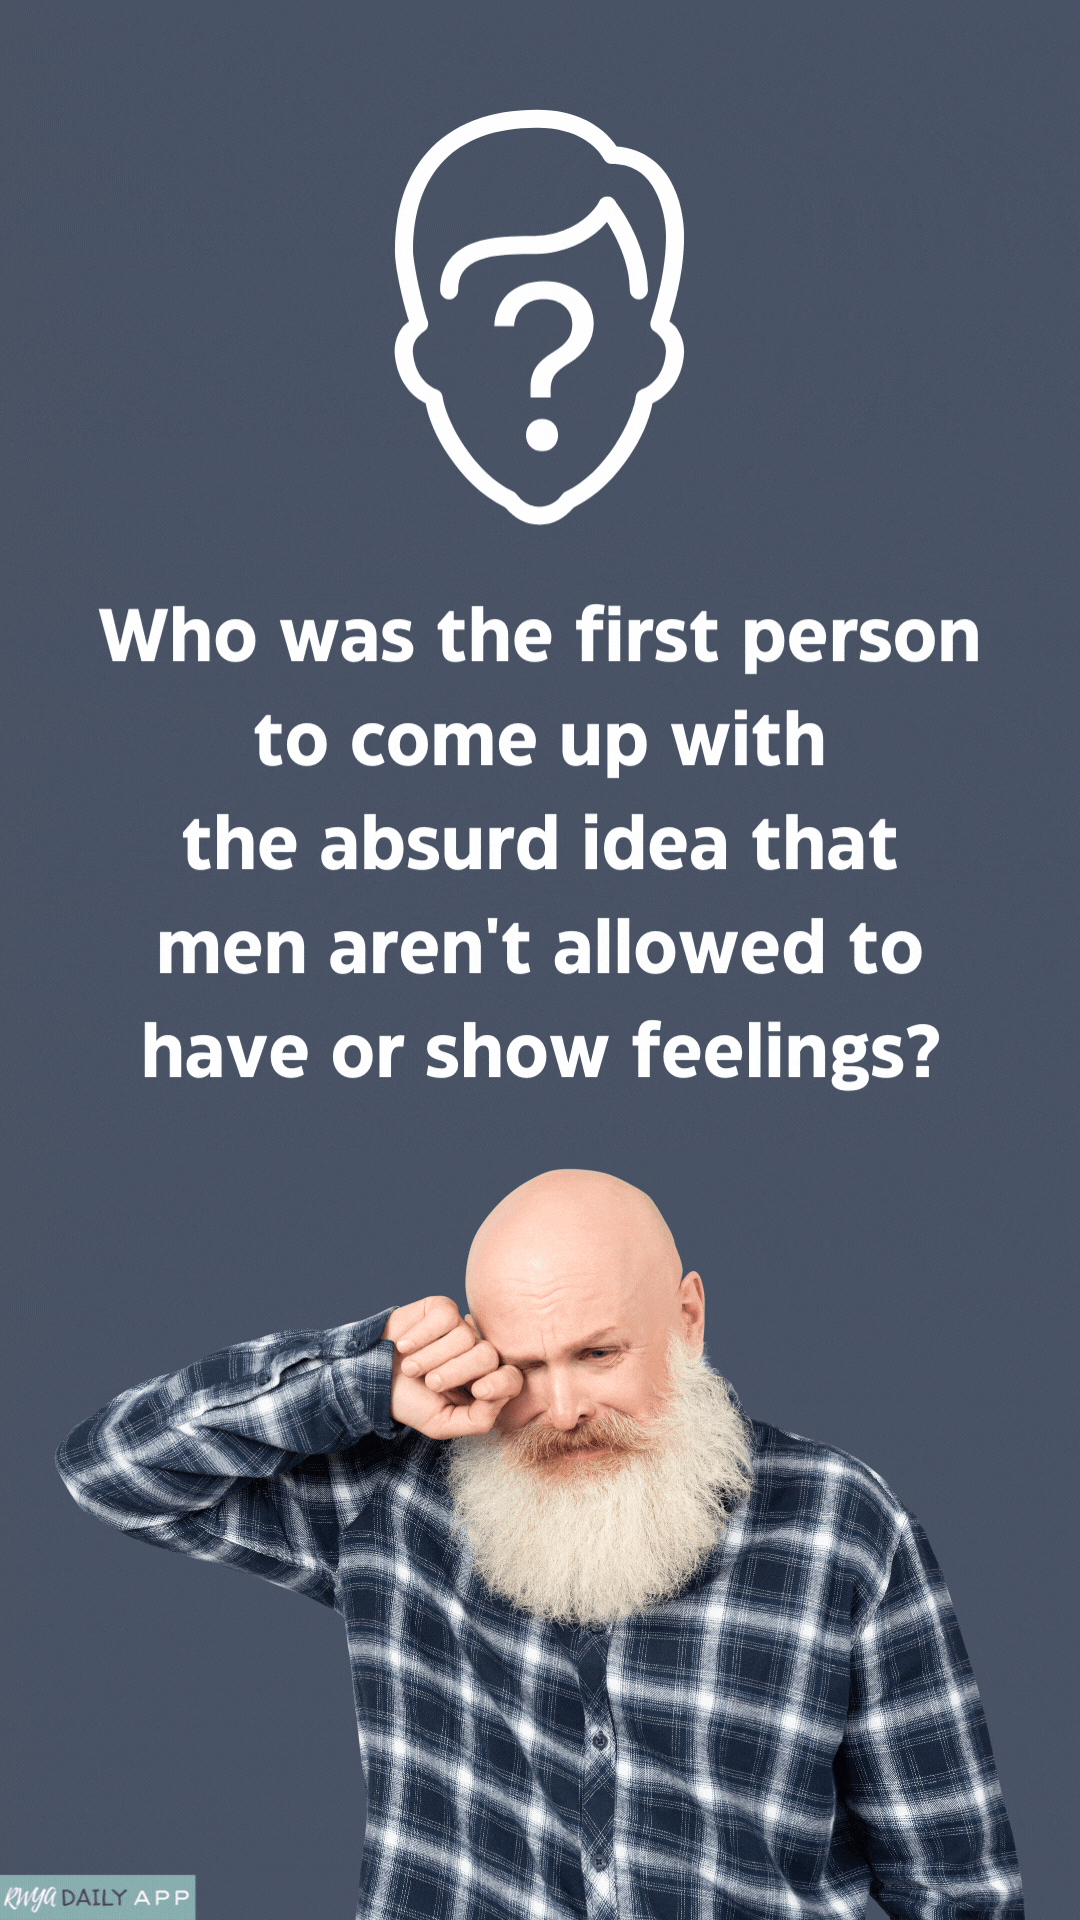 Who was the first person to come up with the absurd idea that men aren't allowed to have or show feelings?